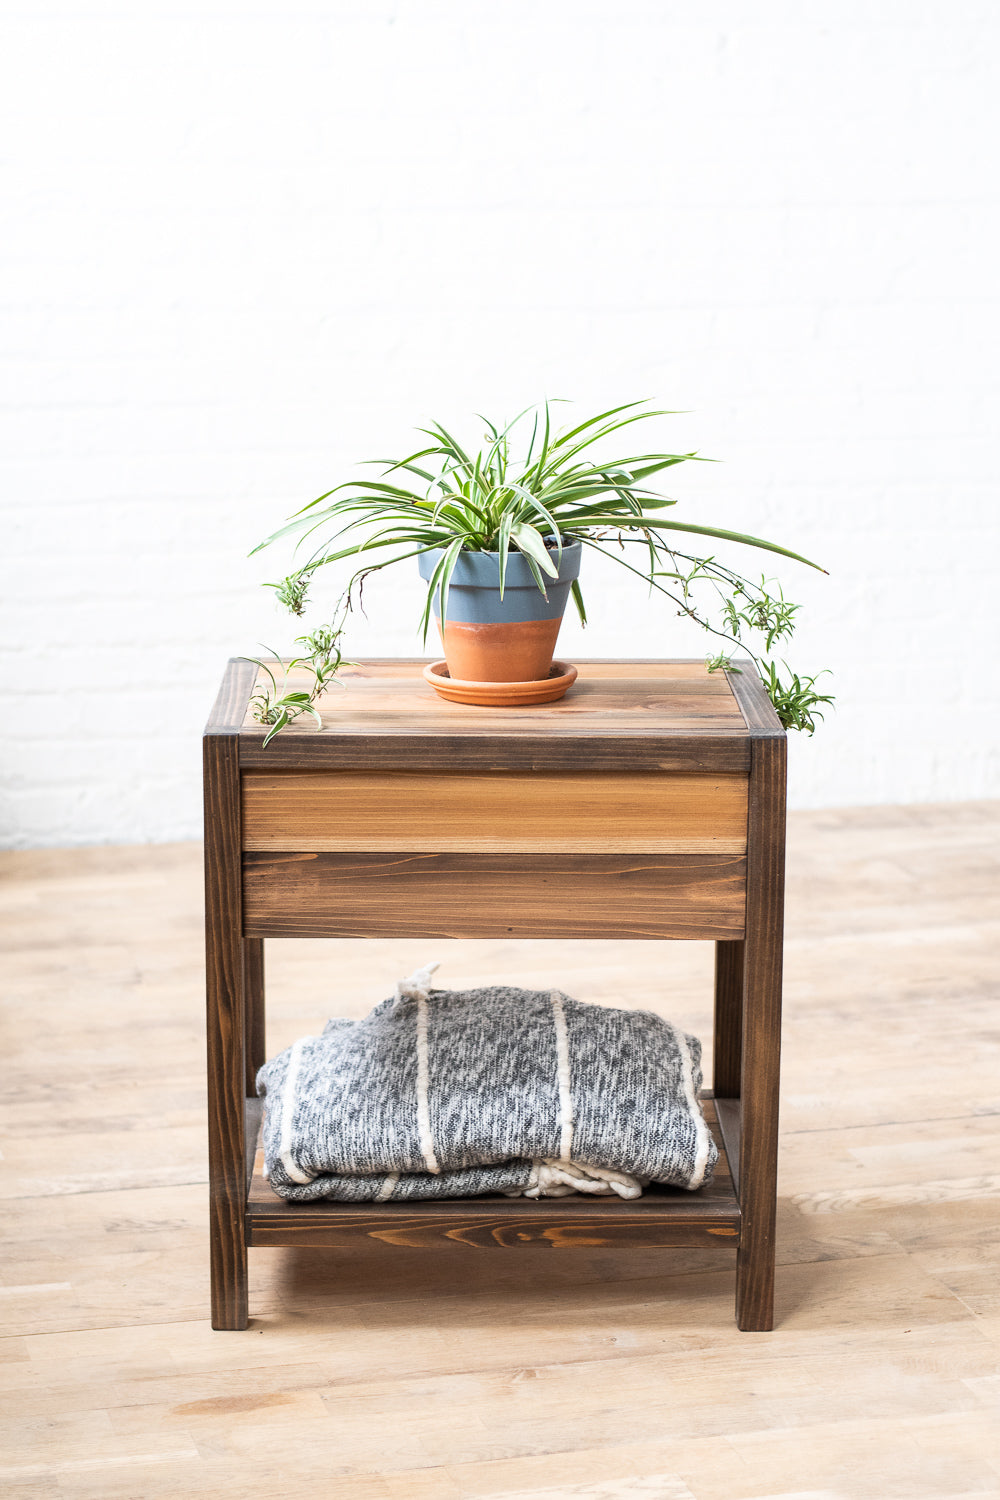 Side Tables, End Tables